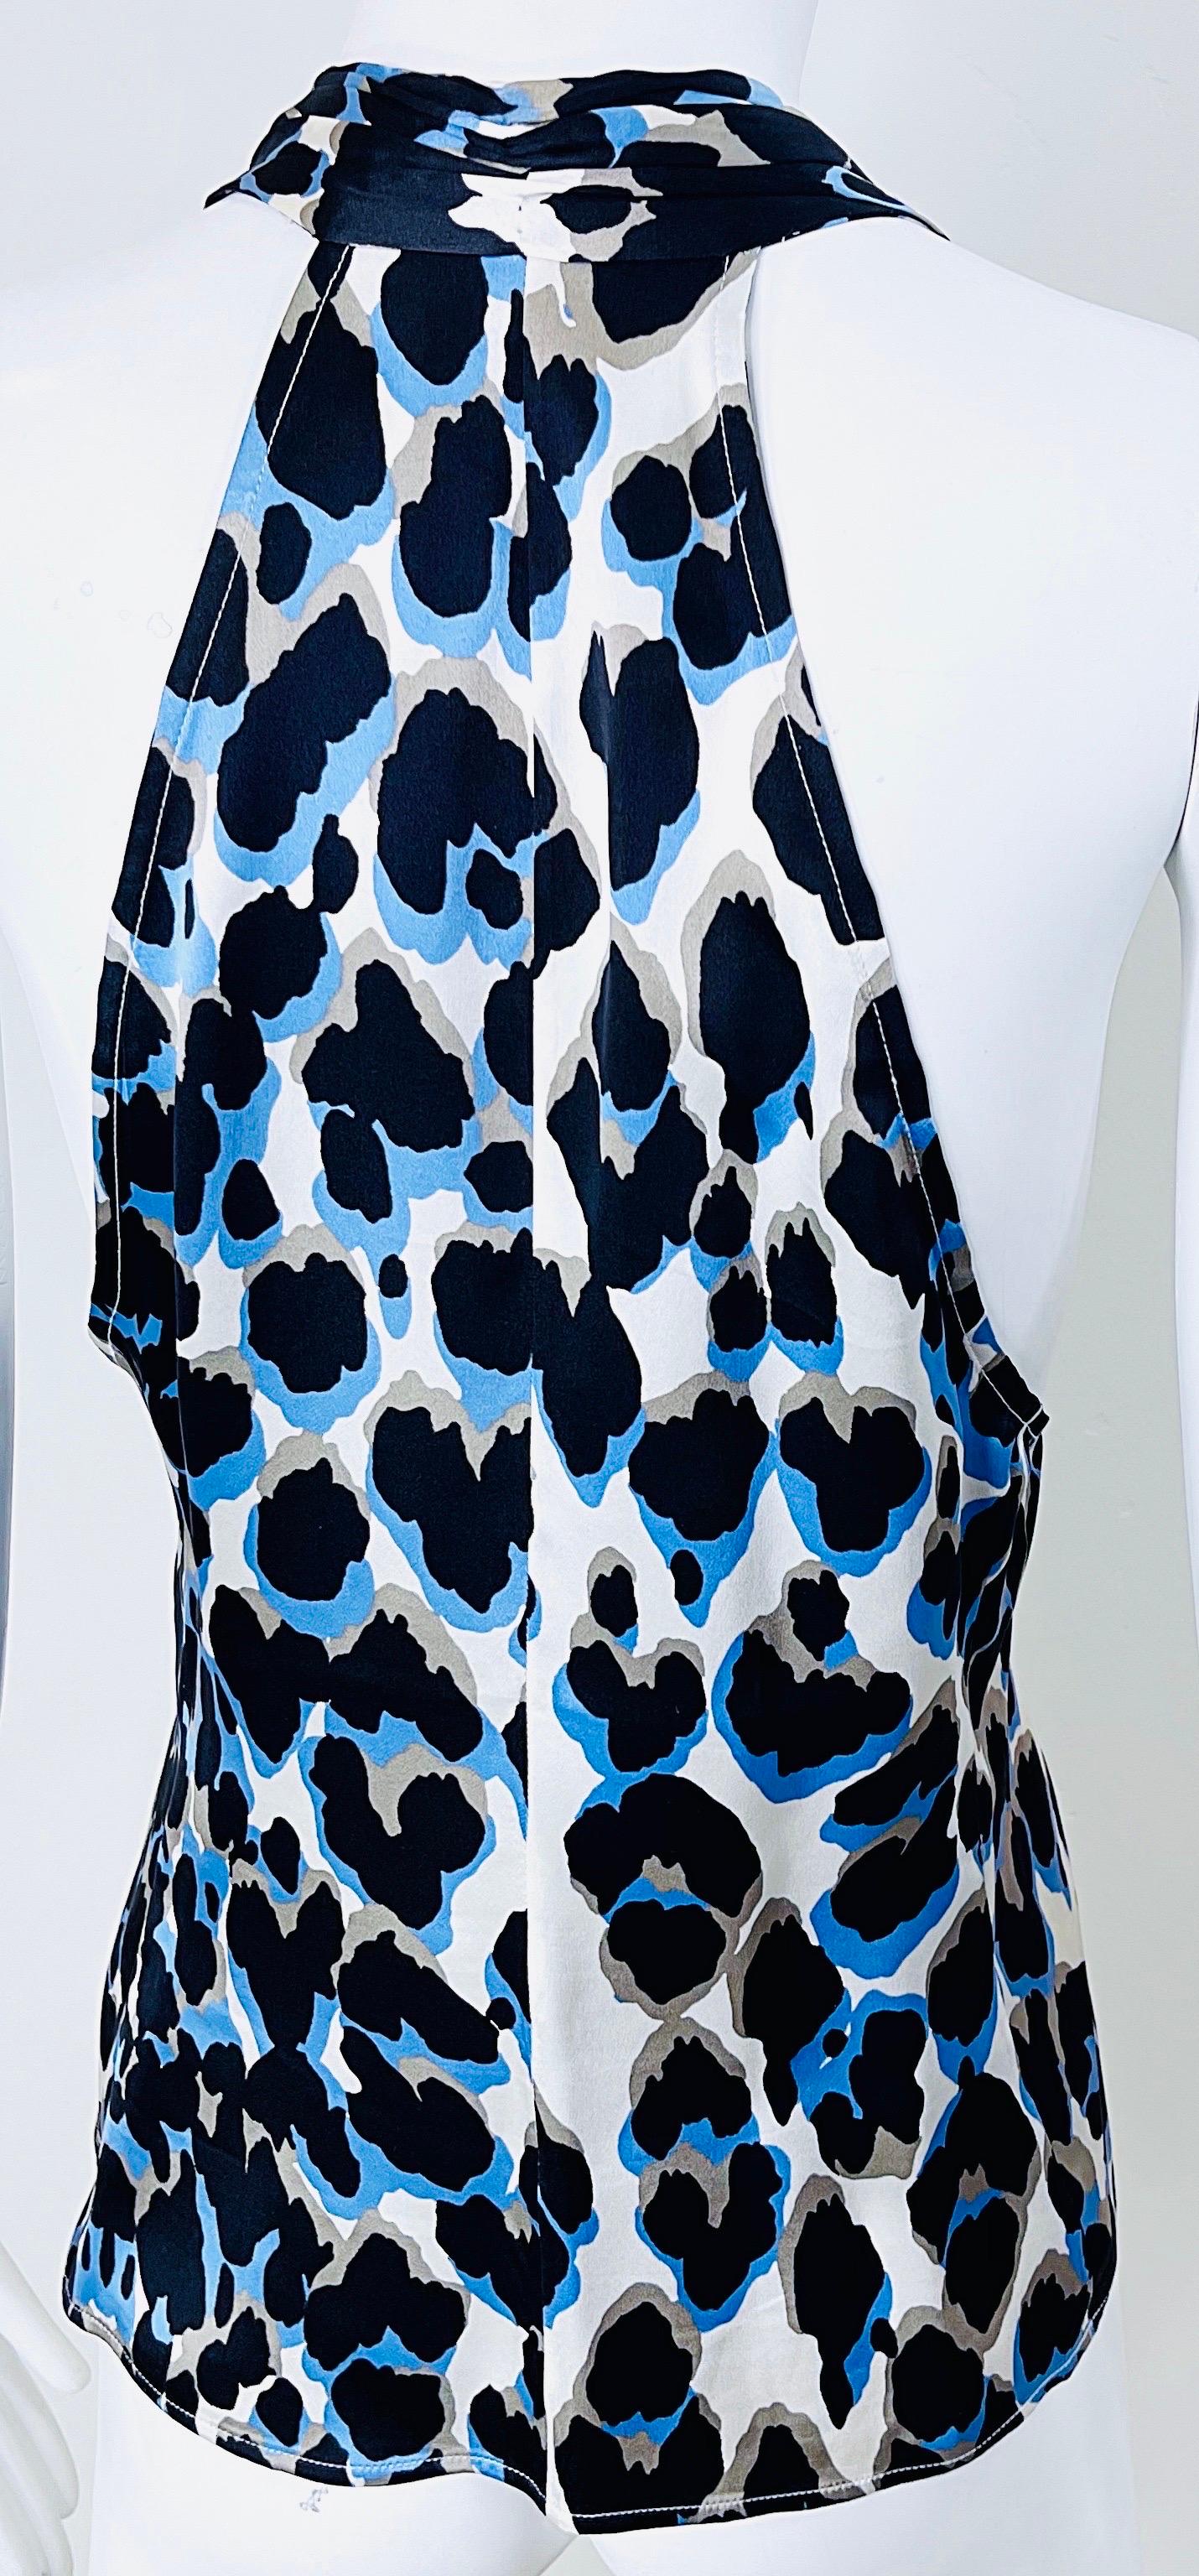 Roberto Cavalli 2000s Size 44 / US 8 Blue Leopard Silk Sleeveless Ruffle Blouse In Excellent Condition For Sale In San Diego, CA